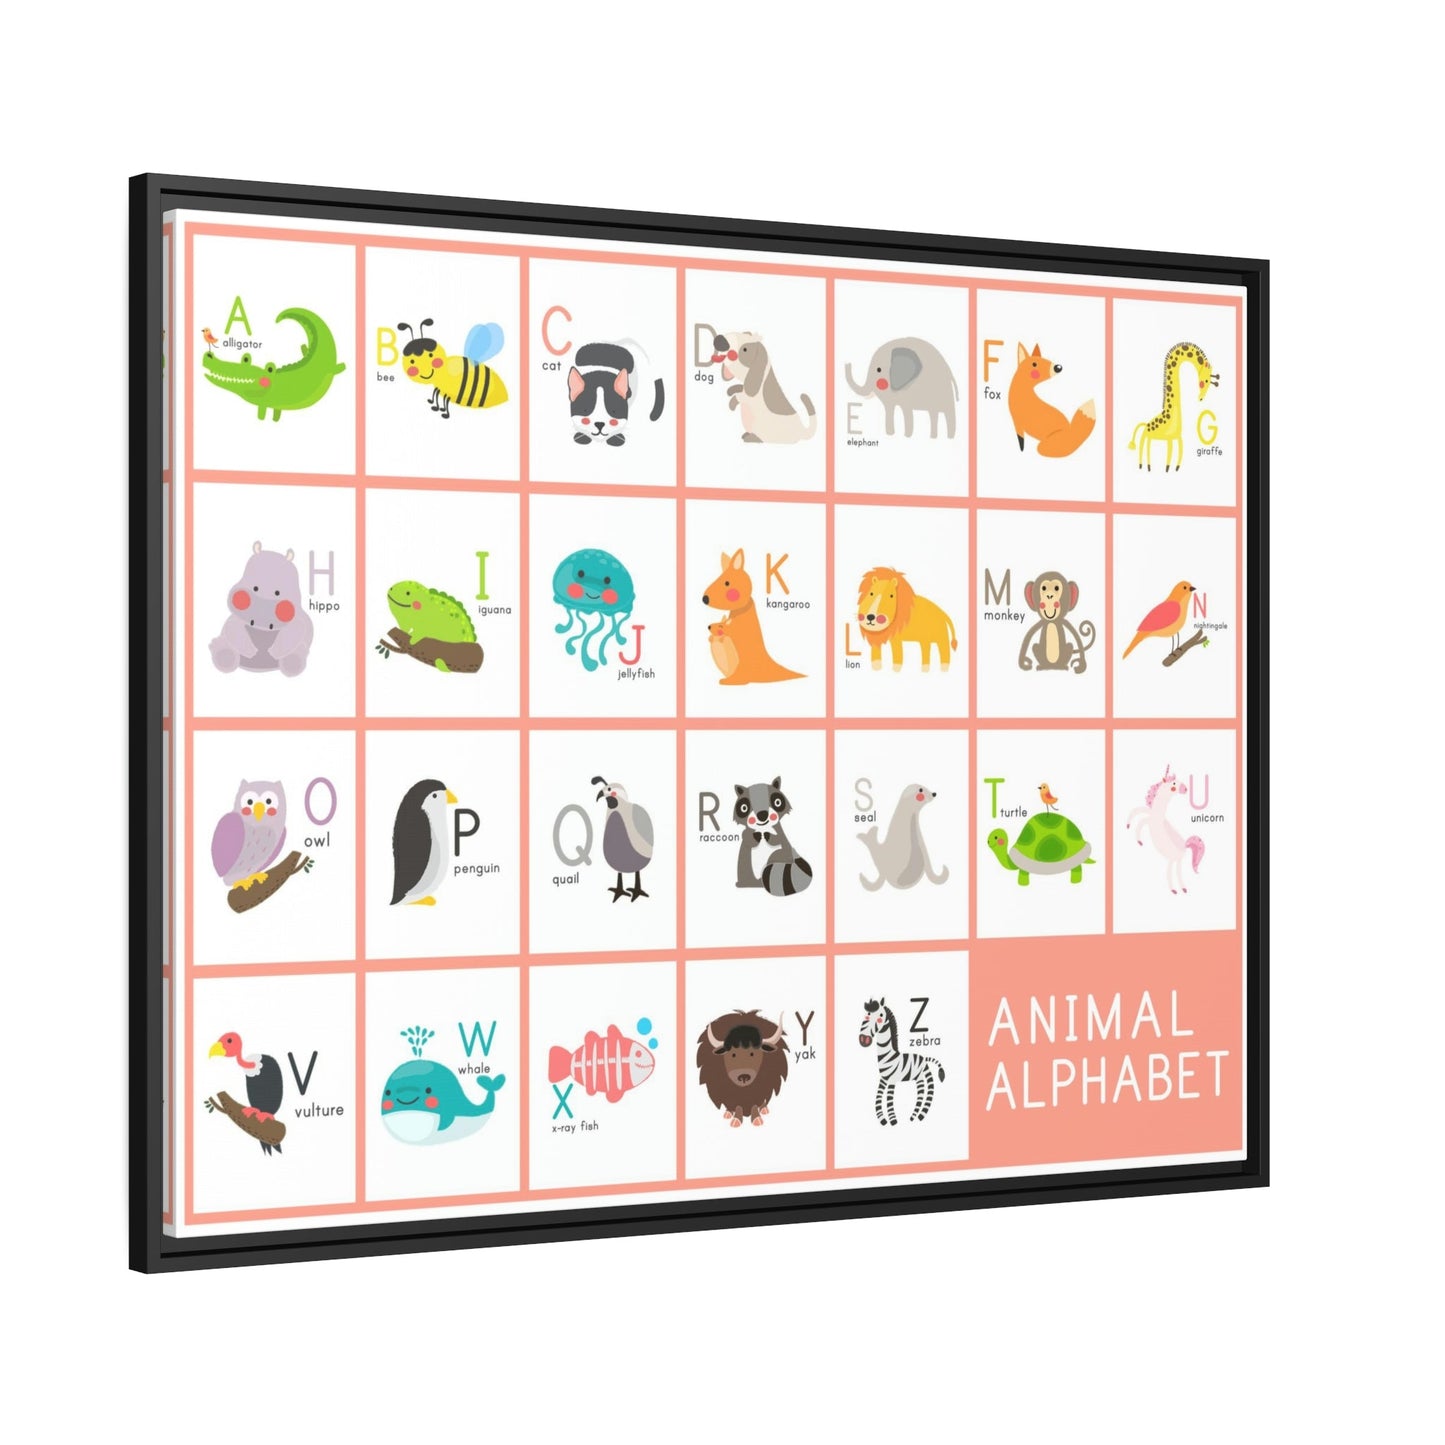 World of Wonder: Educational Wall Art on Natural Canvas for Kids' Bedrooms